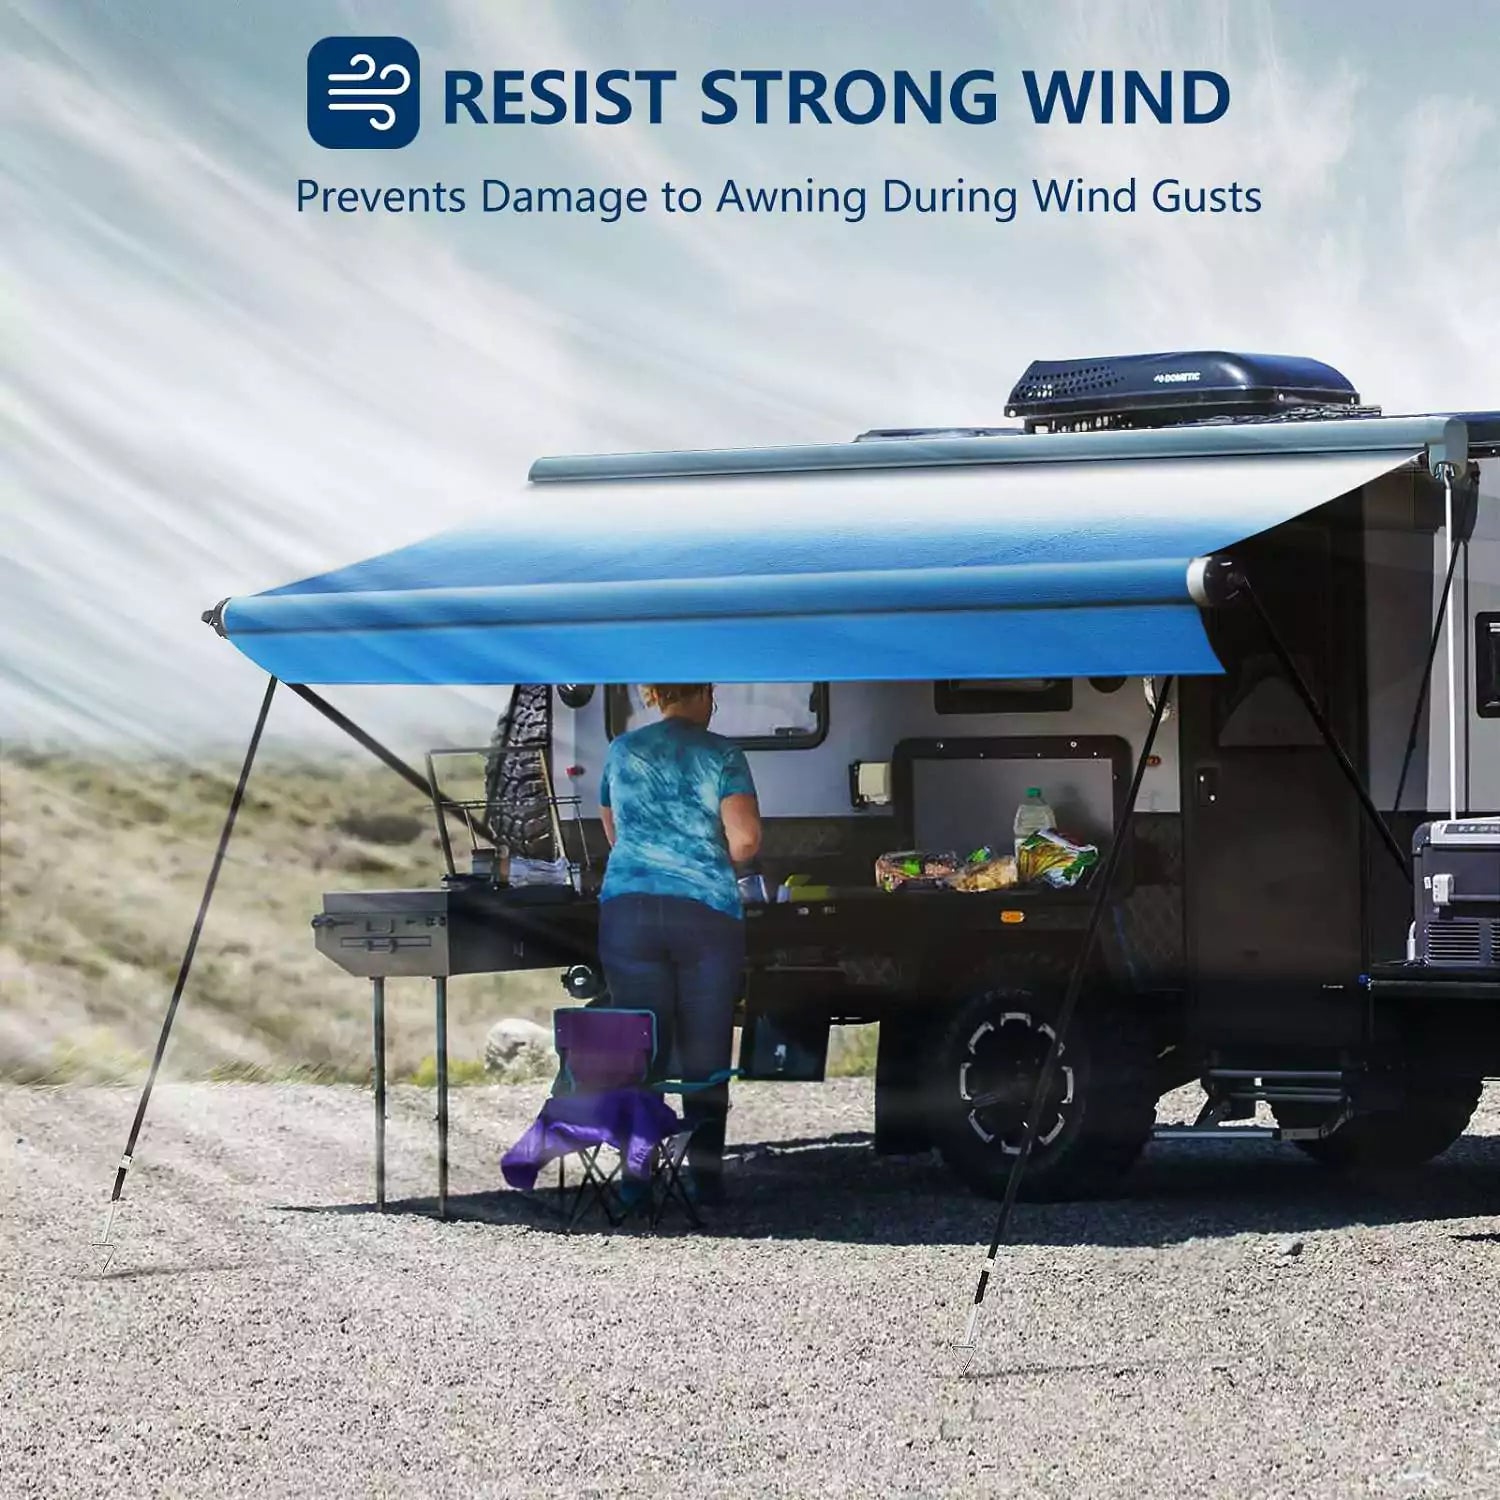 Resist strong wind RV awning anchors